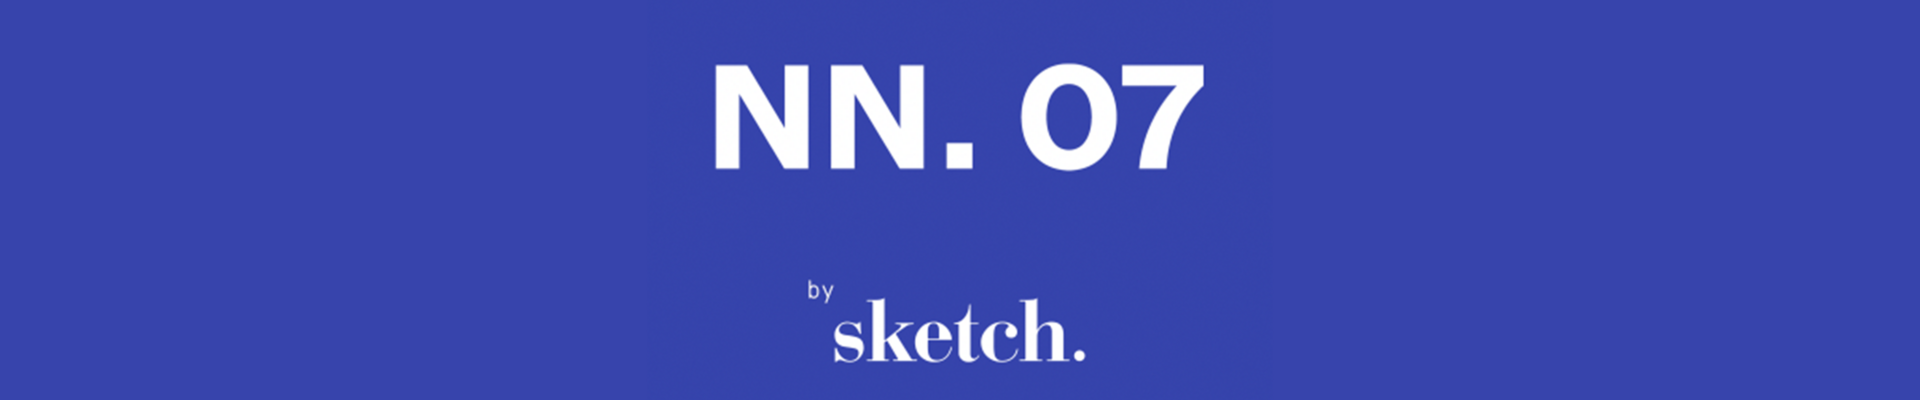 THE 5TH ANNIVERSARY OF SKETCH